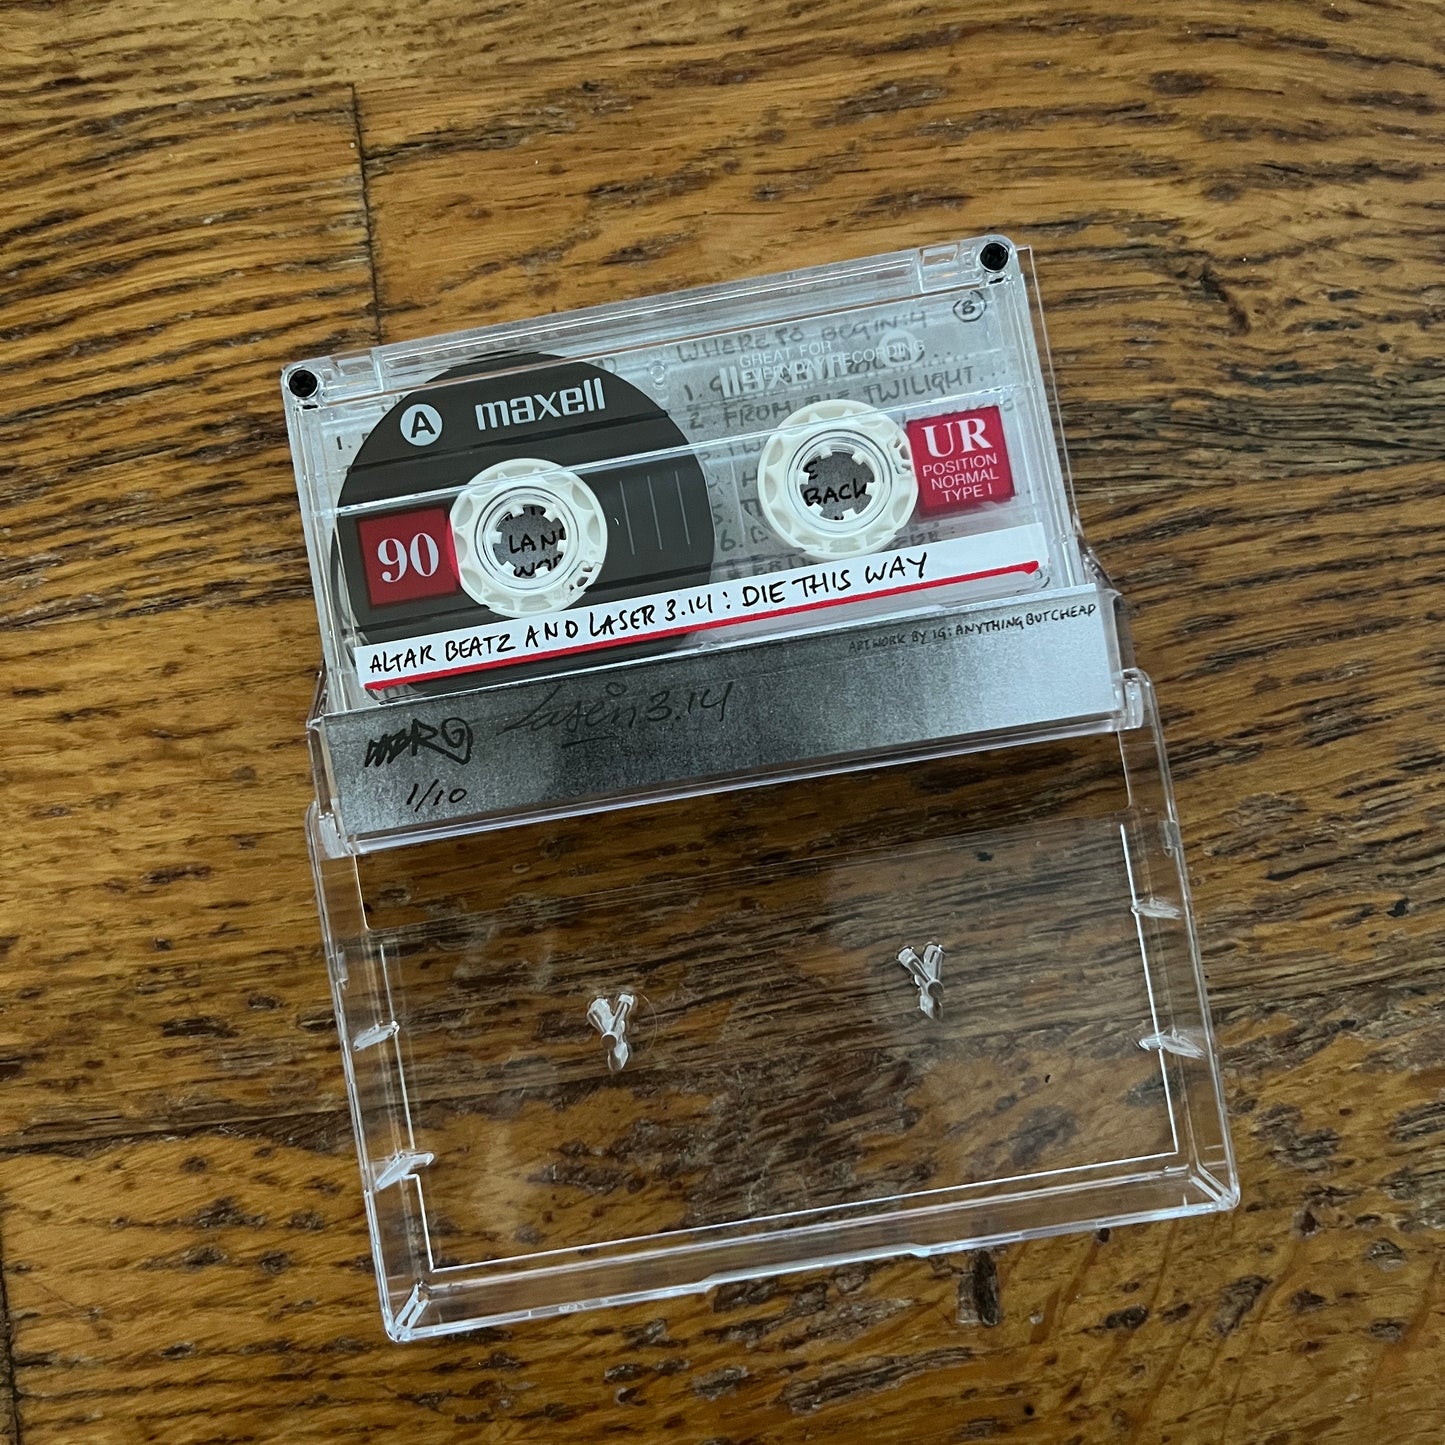 DIY Cassette Tape by Altar Beatz and Laser 3.14 - DIE THIS WAY 9/10